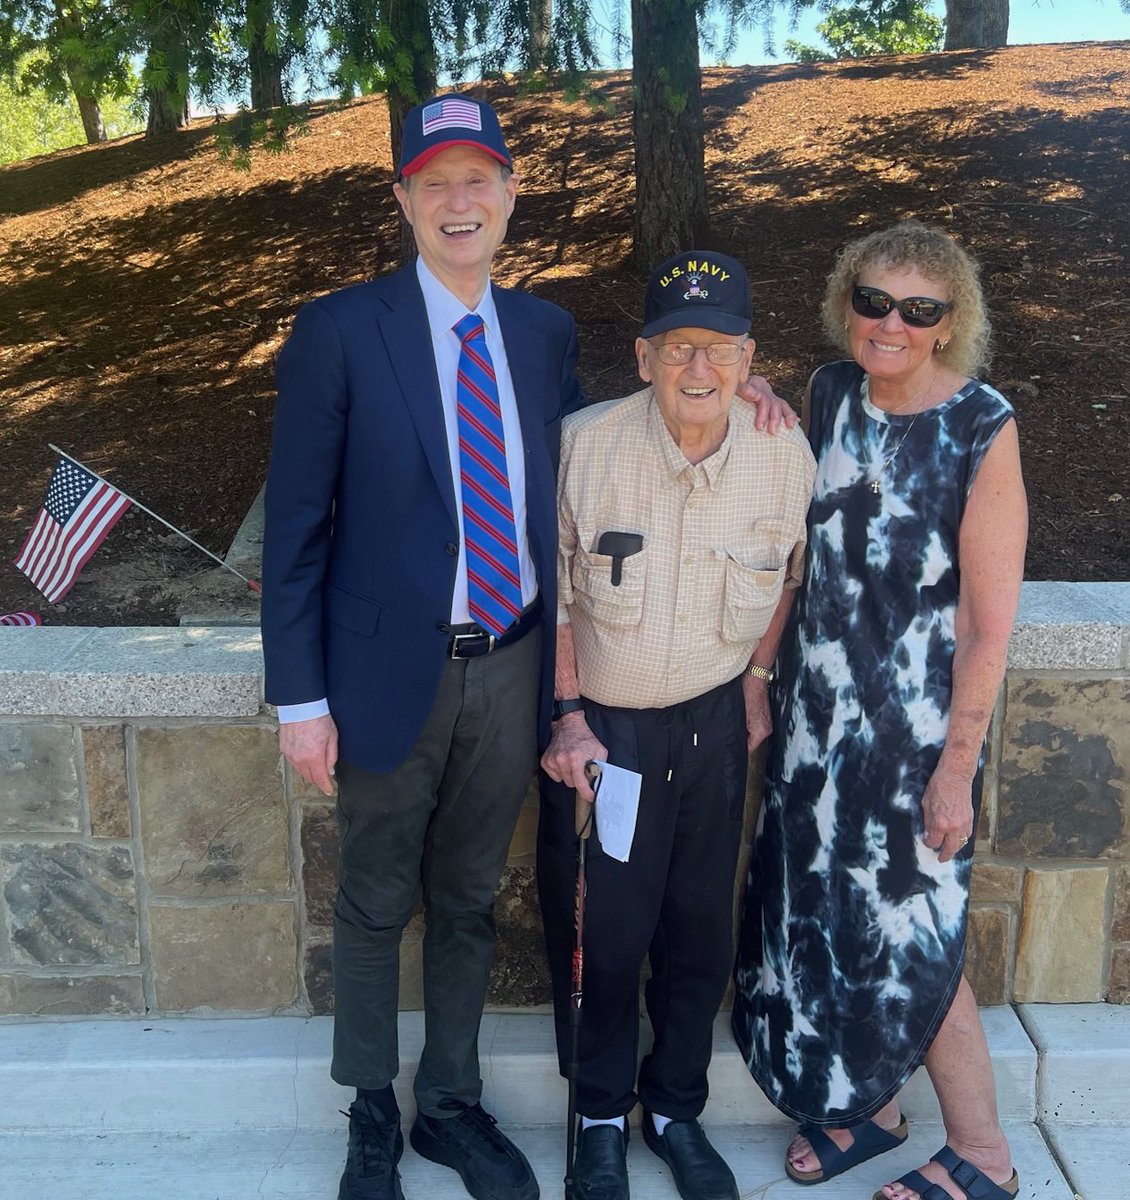 Southern Oregon showed again the importance of #MemorialDay with today’s sacred & special remembrance here at Eagle Point National Cemetery. We can never forget the fallen heroes who gave all of us as Americans the freedoms to worship freely, gather peaceably & speak openly.